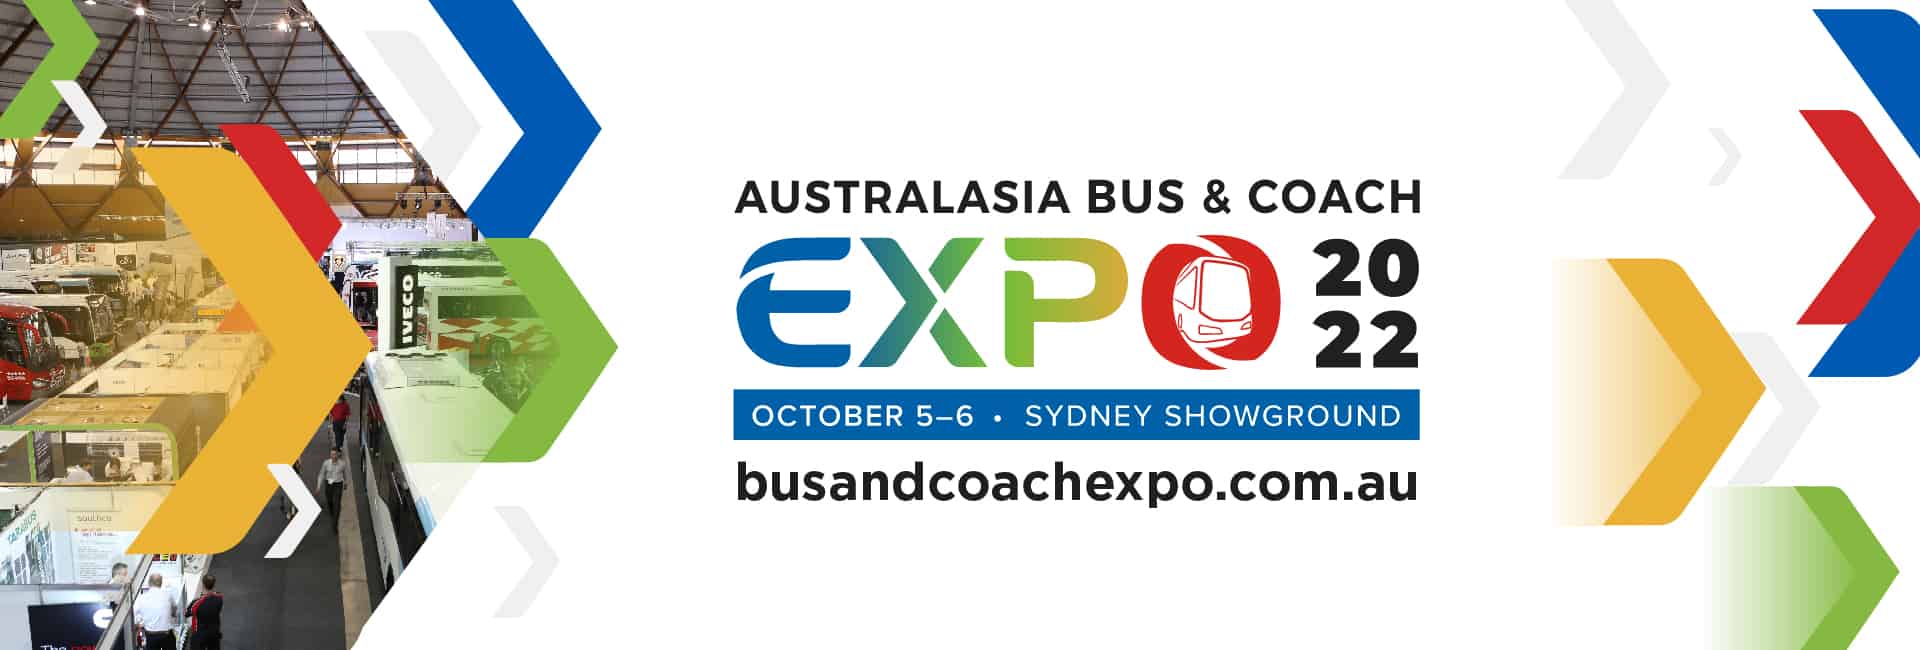 21296 BusNSW Bus And Coach Expo Banners V2 Slider Web Banner